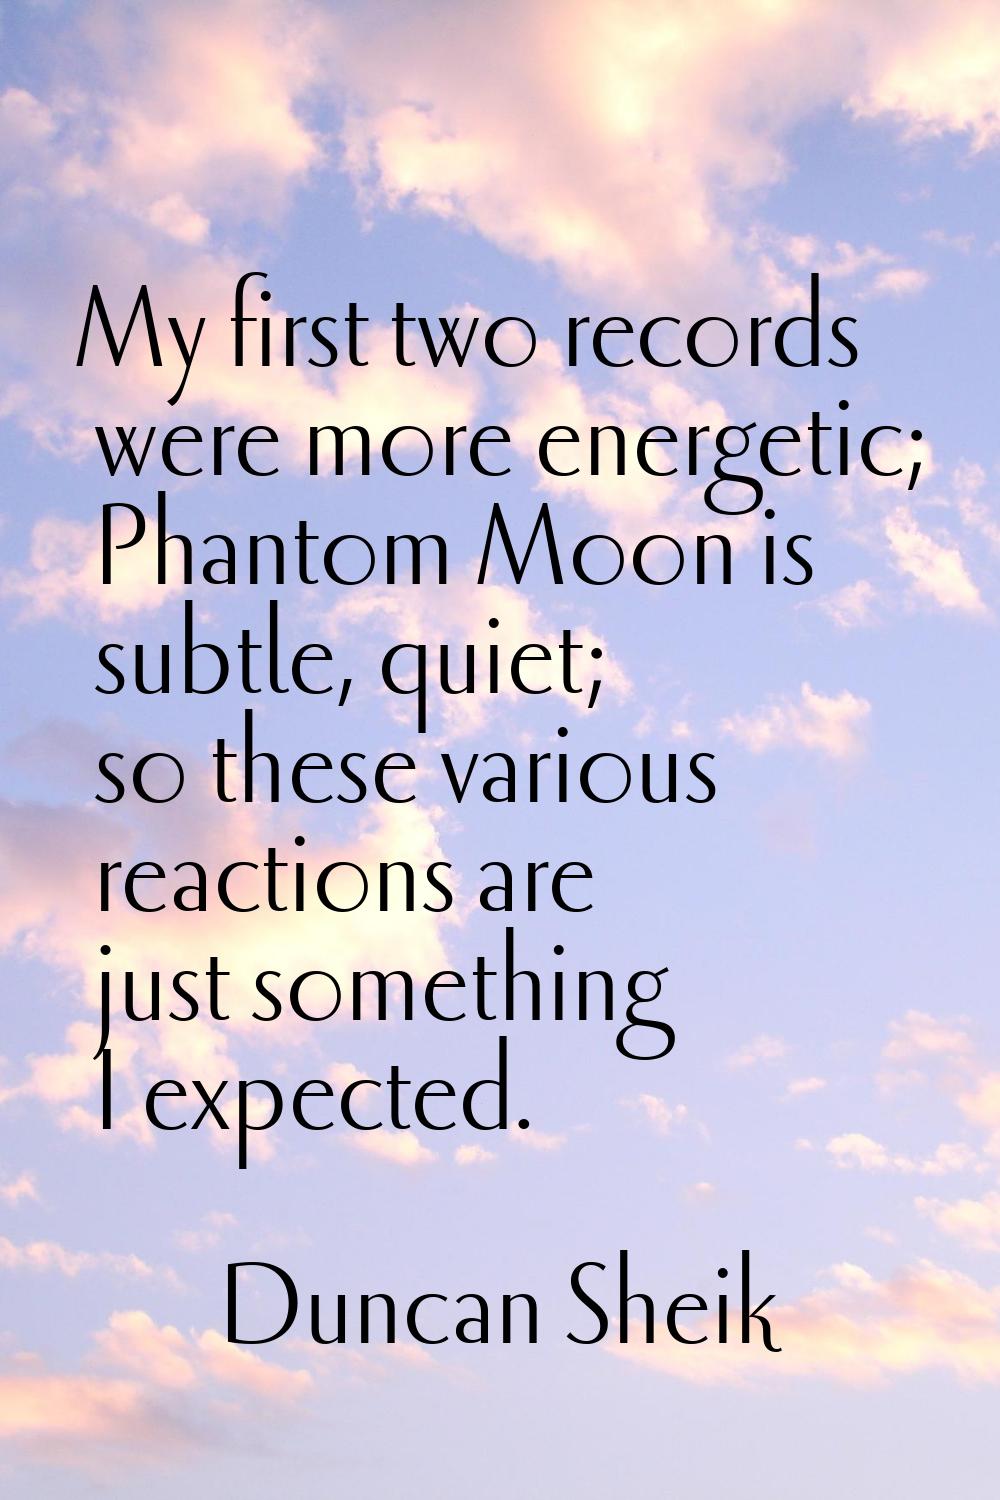 My first two records were more energetic; Phantom Moon is subtle, quiet; so these various reactions